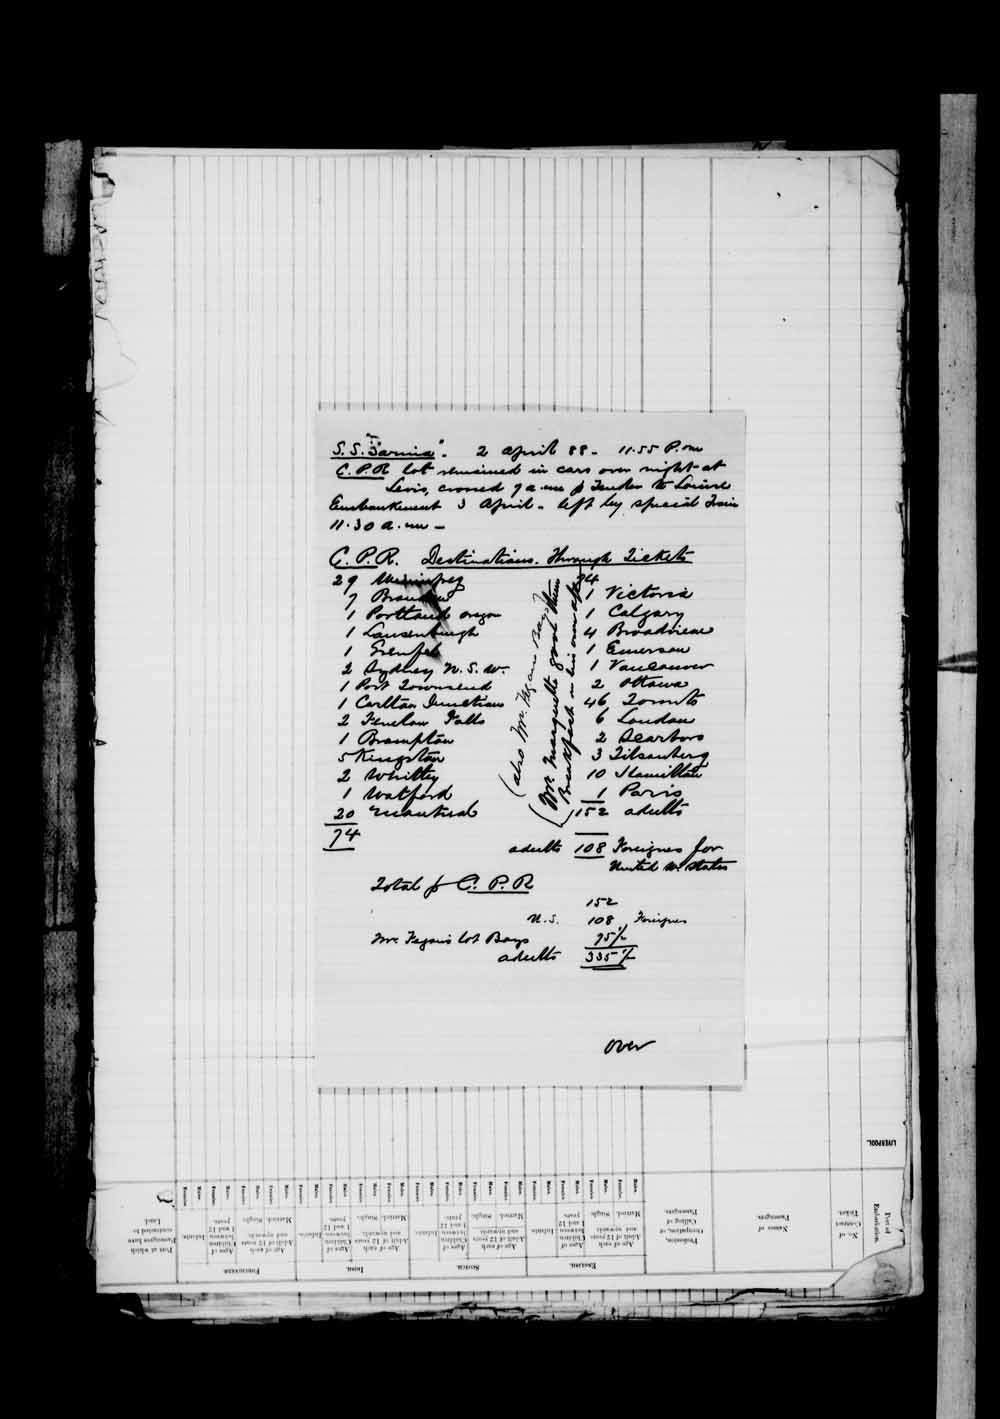 Digitized page of Passenger Lists for Image No.: e003674504